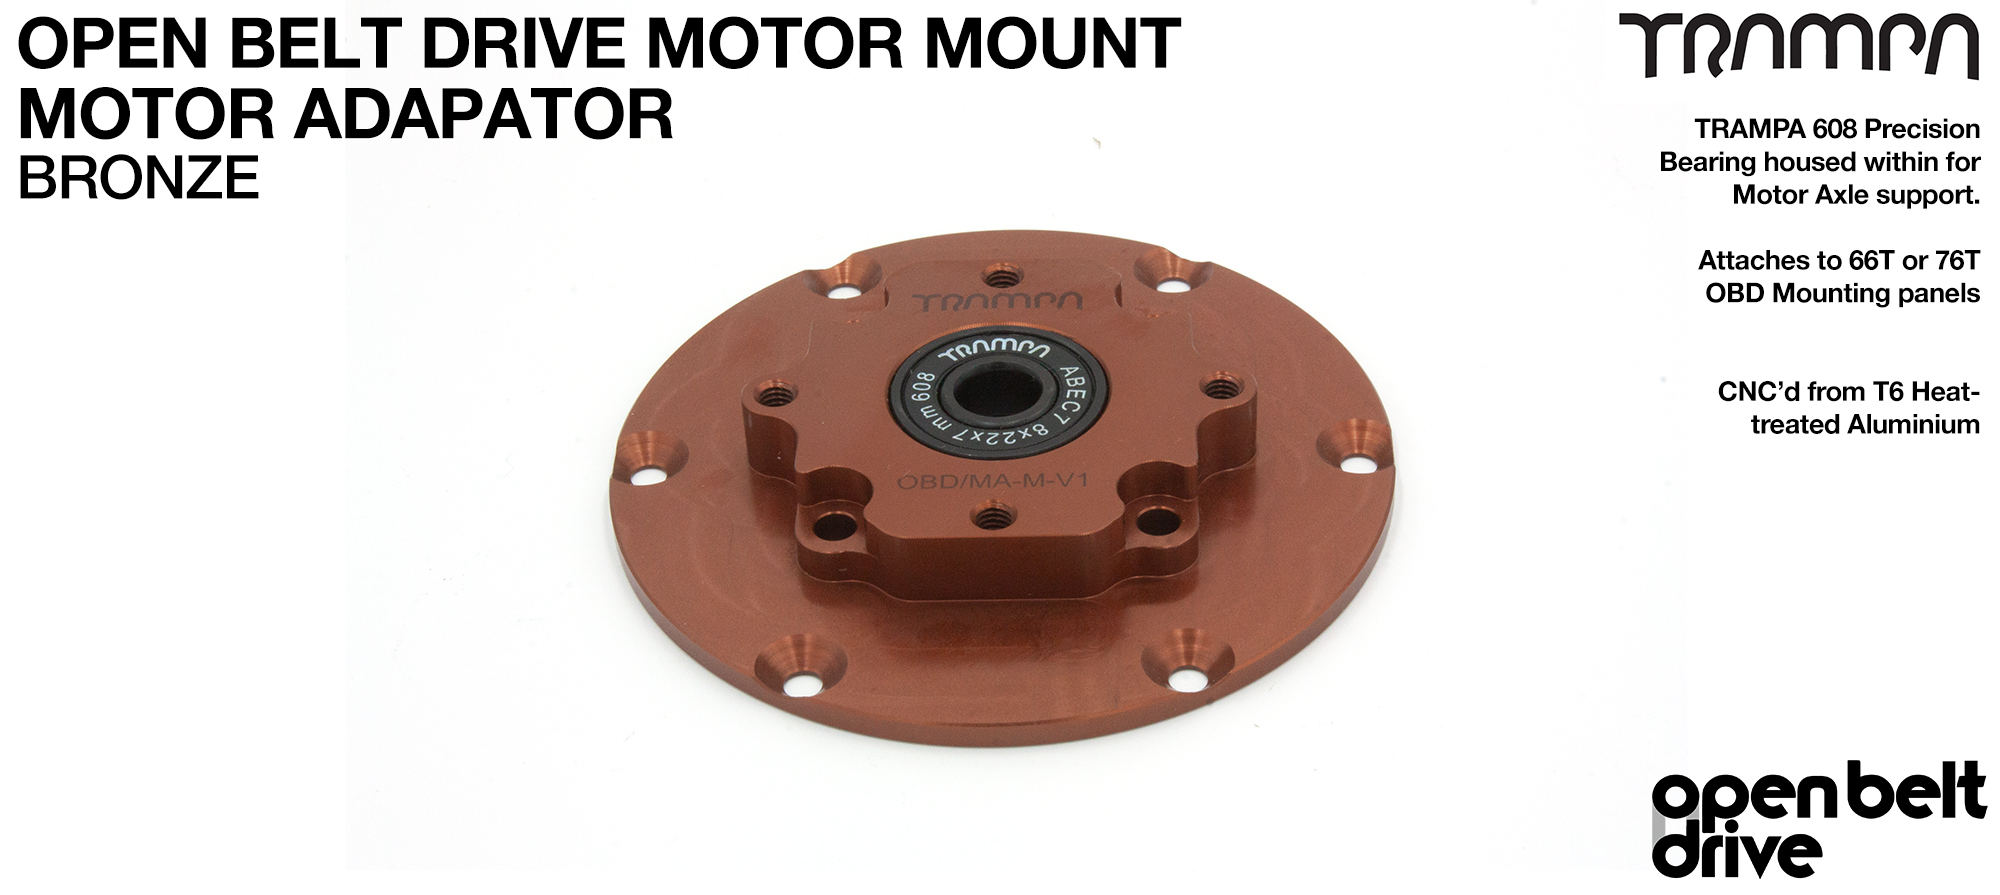 OBD Motor Adaptor with Housed Bearing - BRONZE